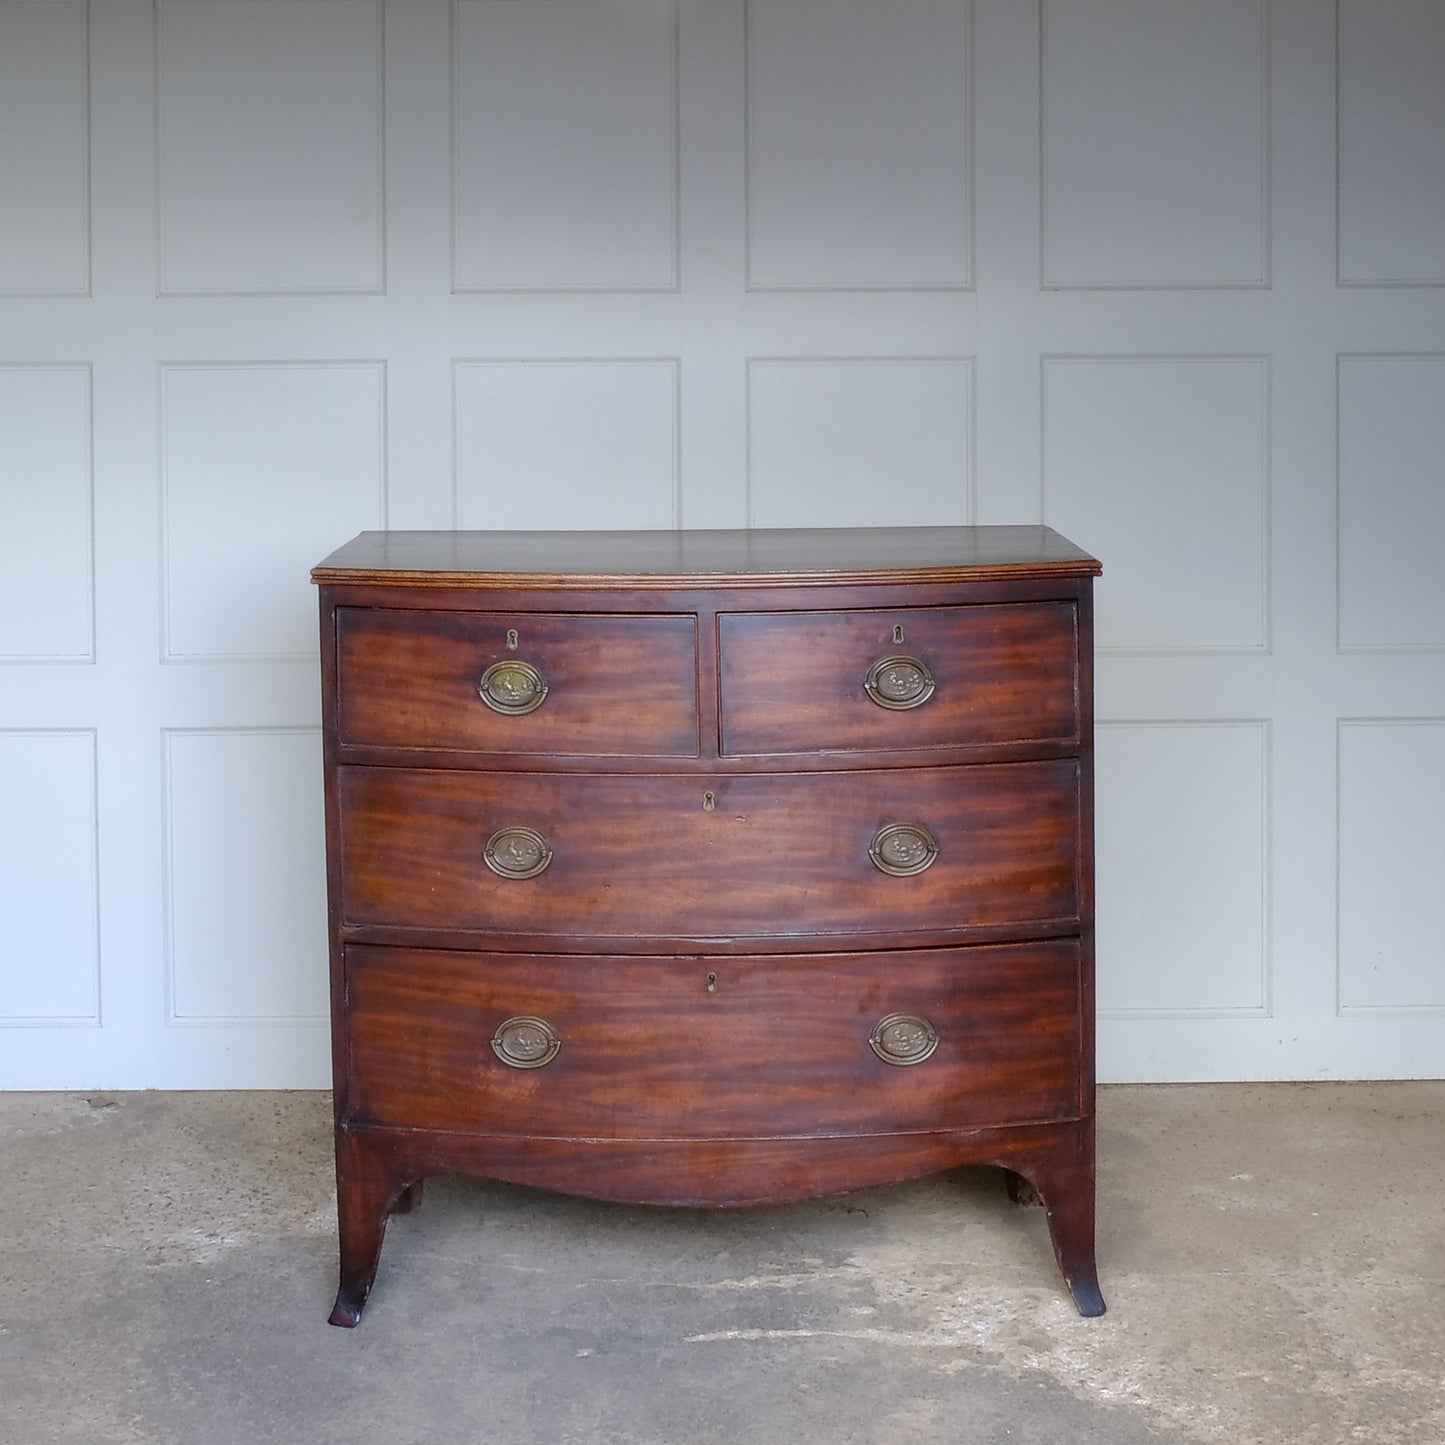 18th century mahogany bow fronted chest of drawers